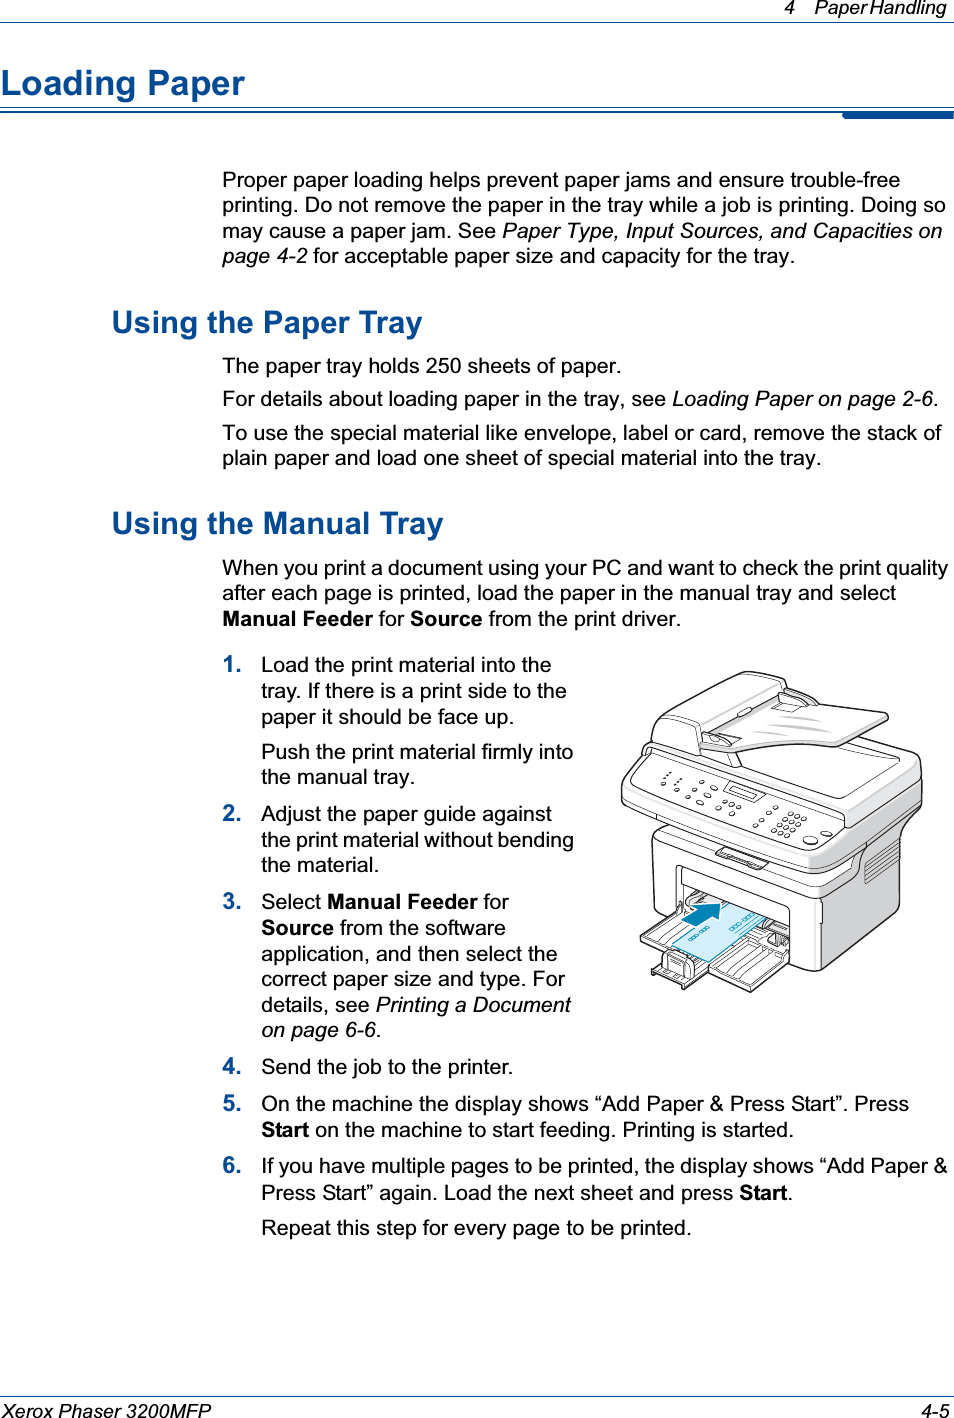 4 Paper Handling Xerox Phaser 3200MFP 4-5Loading PaperProper paper loading helps prevent paper jams and ensure trouble-free printing. Do not remove the paper in the tray while a job is printing. Doing so may cause a paper jam. See Paper Type, Input Sources, and Capacities on page 4-2 for acceptable paper size and capacity for the tray. Using the Paper TrayThe paper tray holds 250 sheets of paper.For details about loading paper in the tray, see Loading Paper on page 2-6.To use the special material like envelope, label or card, remove the stack of plain paper and load one sheet of special material into the tray. Using the Manual TrayWhen you print a document using your PC and want to check the print quality after each page is printed, load the paper in the manual tray and select Manual Feeder for Source from the print driver.1. Load the print material into the tray. If there is a print side to the paper it should be face up. Push the print material firmly into the manual tray.2. Adjust the paper guide against the print material without bending the material.3. Select Manual Feeder for Source from the software application, and then select the correct paper size and type. For details, see Printing a Document on page 6-6.4. Send the job to the printer.5. On the machine the display shows “Add Paper &amp; Press Start”. Press Start on the machine to start feeding. Printing is started. 6. If you have multiple pages to be printed, the display shows “Add Paper &amp; Press Start” again. Load the next sheet and press Start.Repeat this step for every page to be printed. 